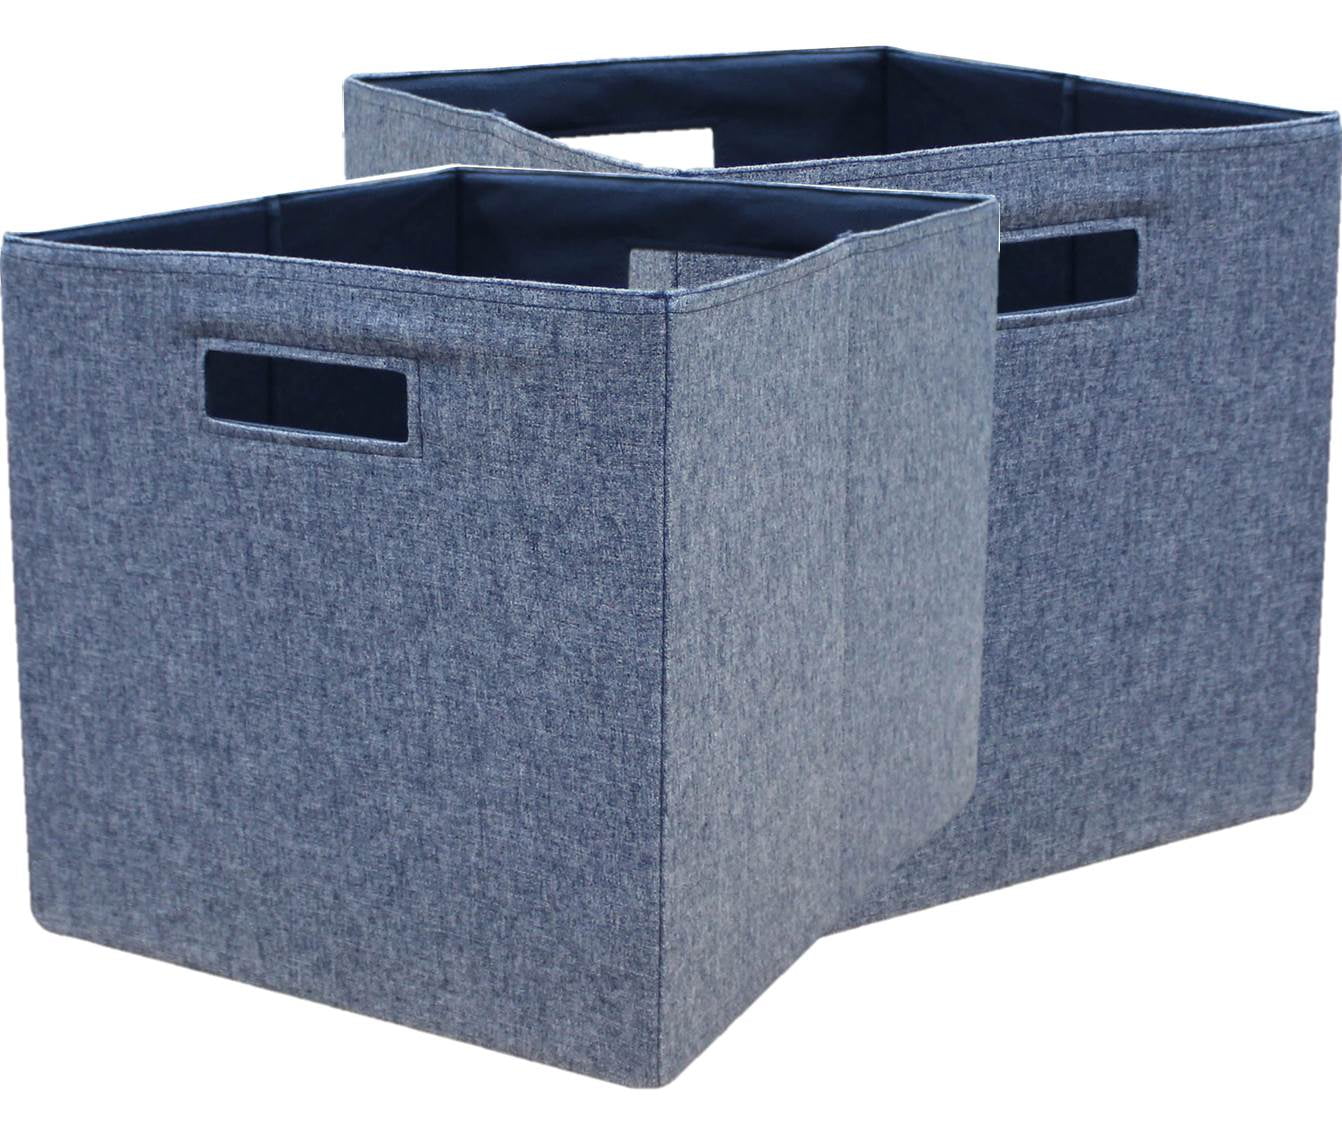 Storage Cube Basket Fabric Drawers Best Cubby Organizer Box Bin 2 Pack 33 Colors 